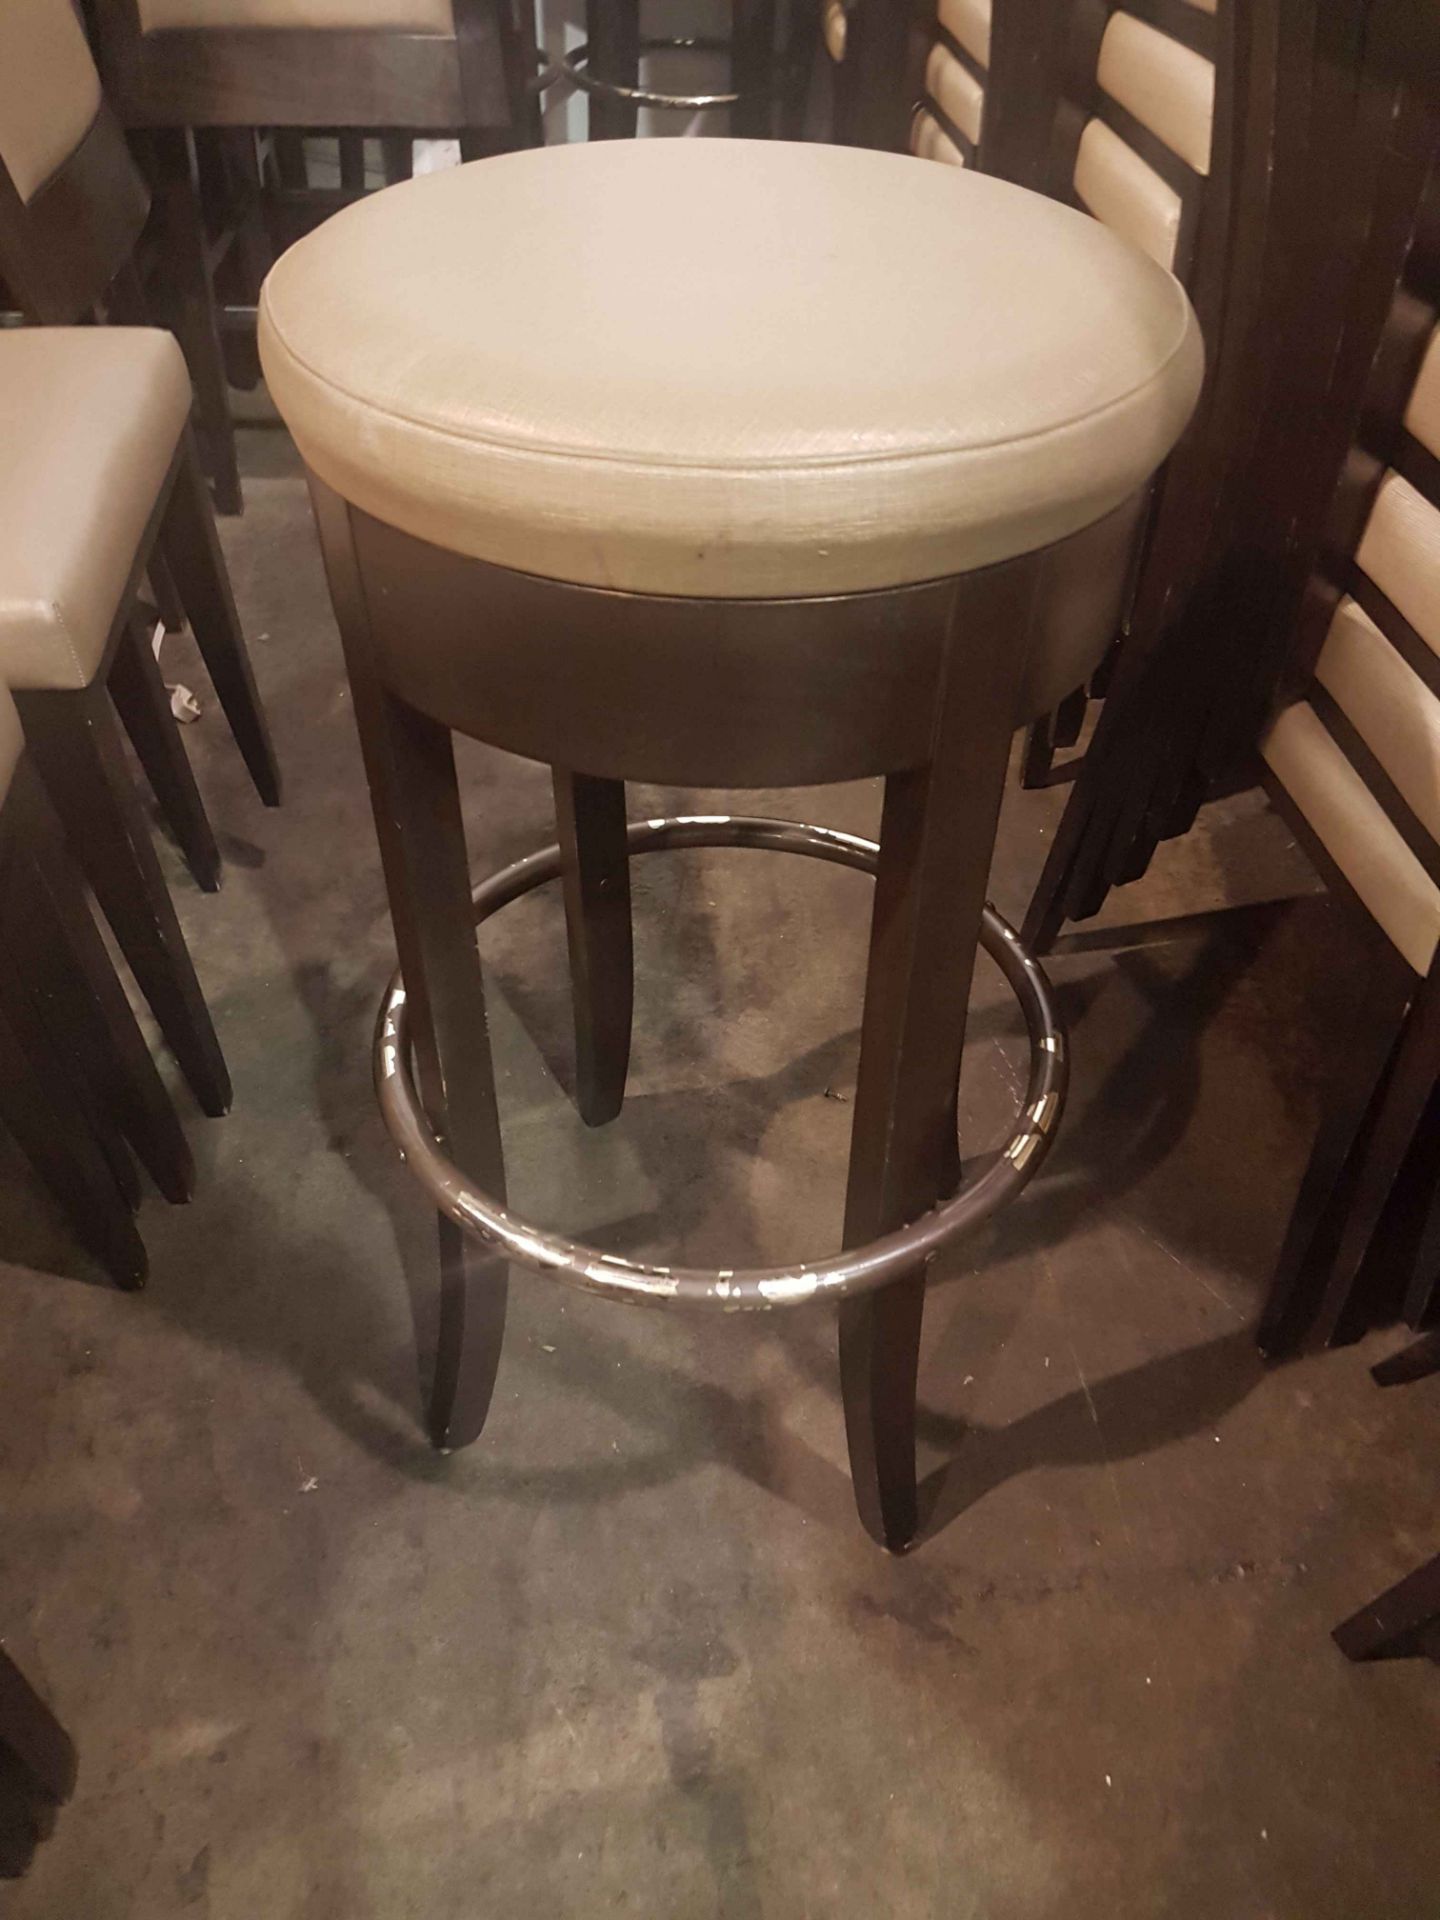 Round Brown Wood Stools - 31" Seat Height - Lot of 6